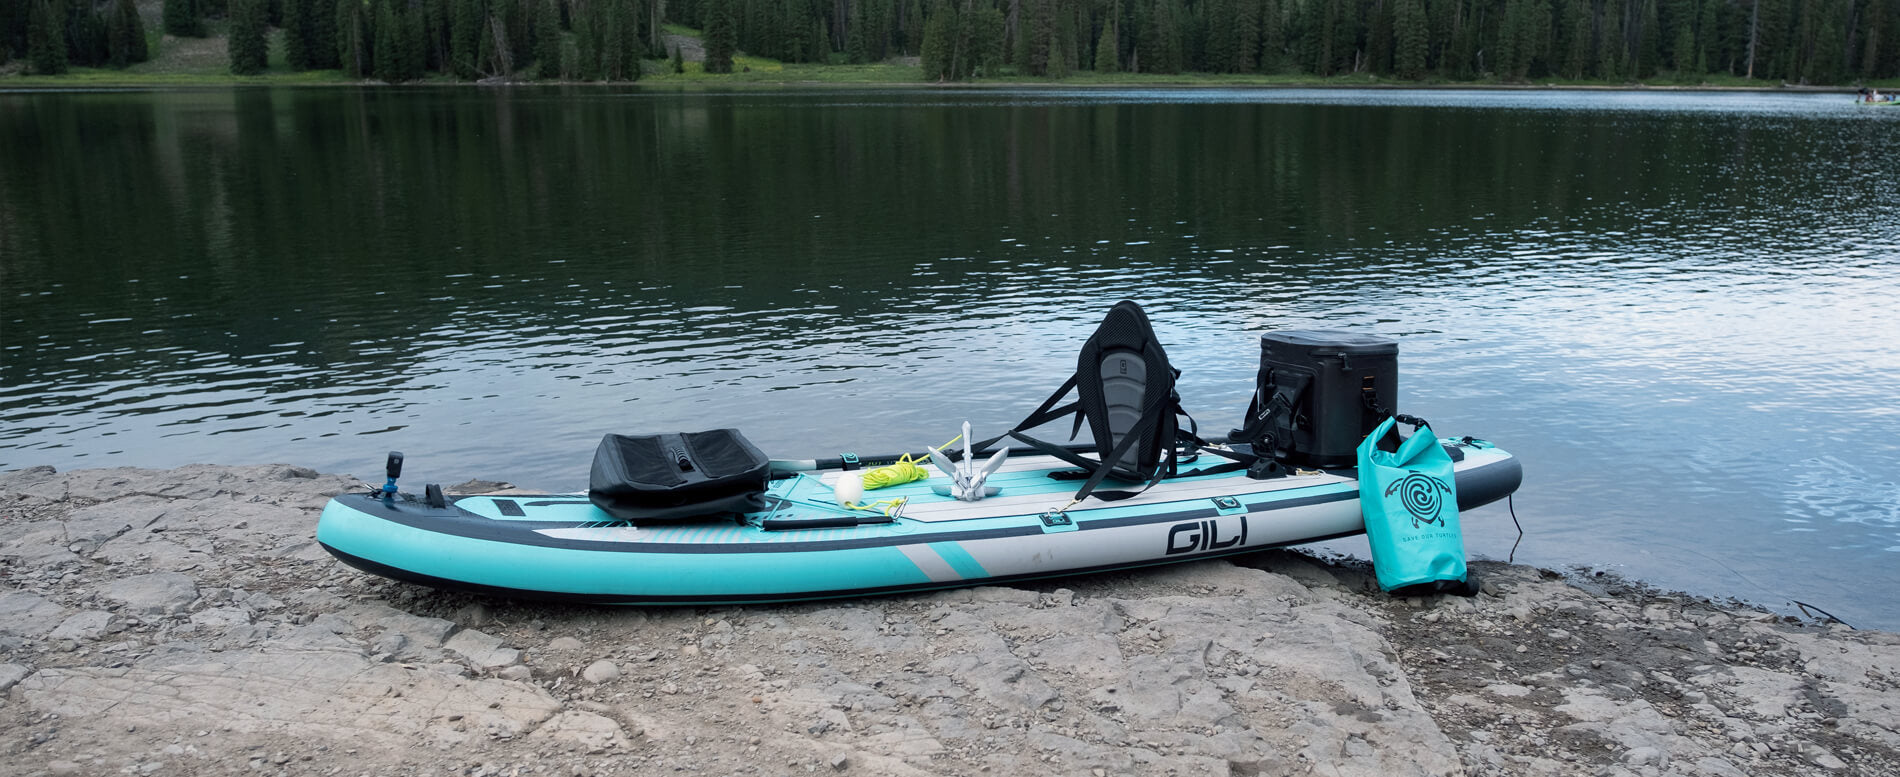 The 32 Best Paddle Board Accessories You Must Have for 2022 - GILI